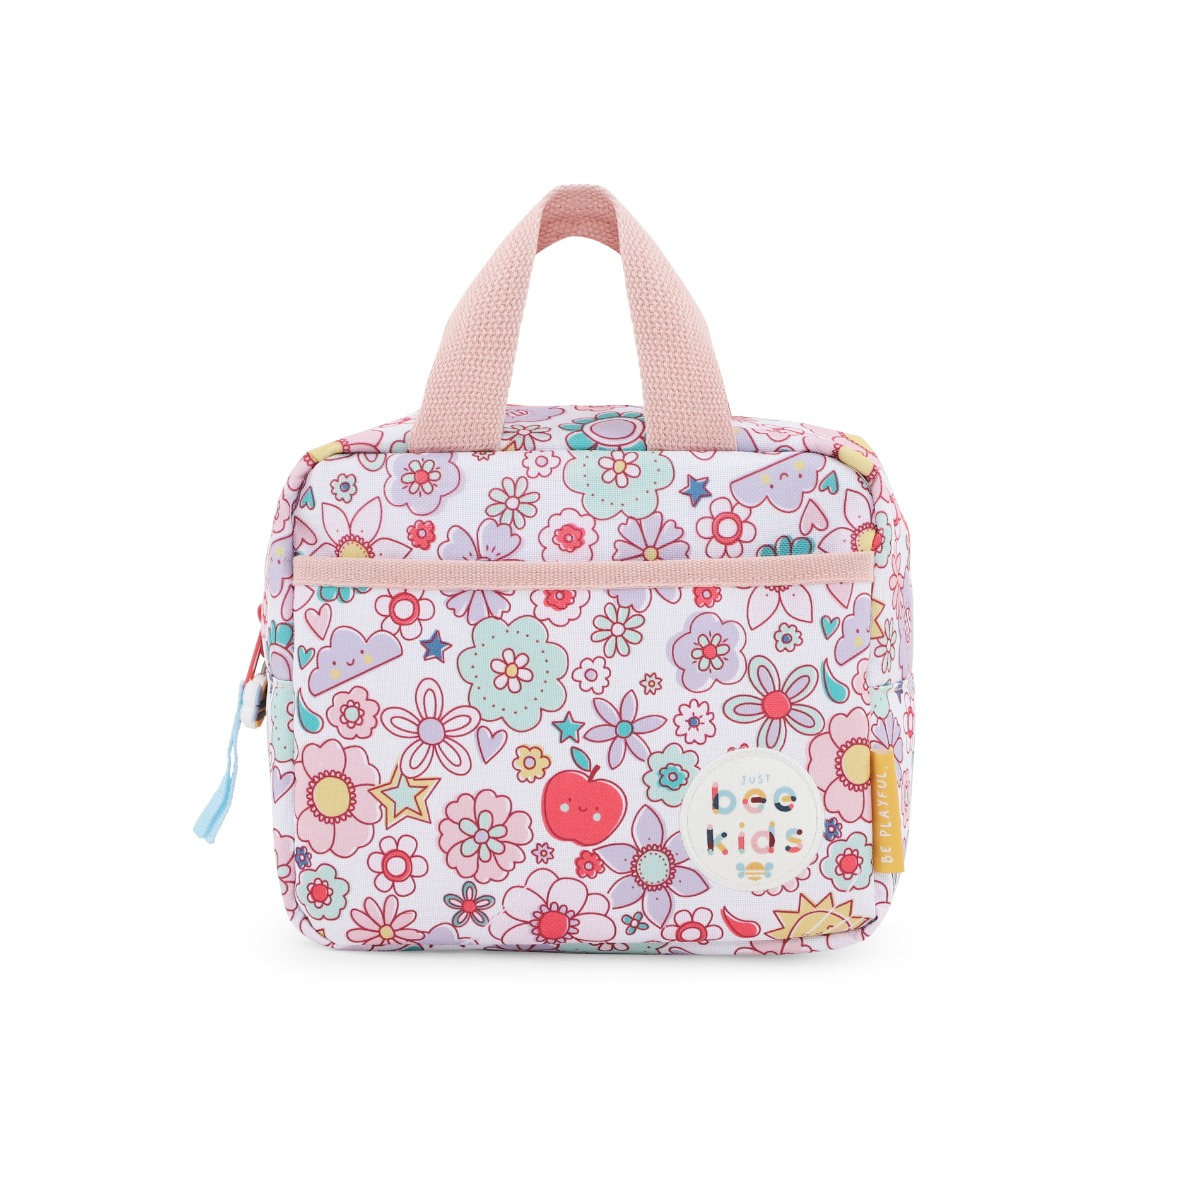 Just Bee Kids Retro Floral Lunch Bag